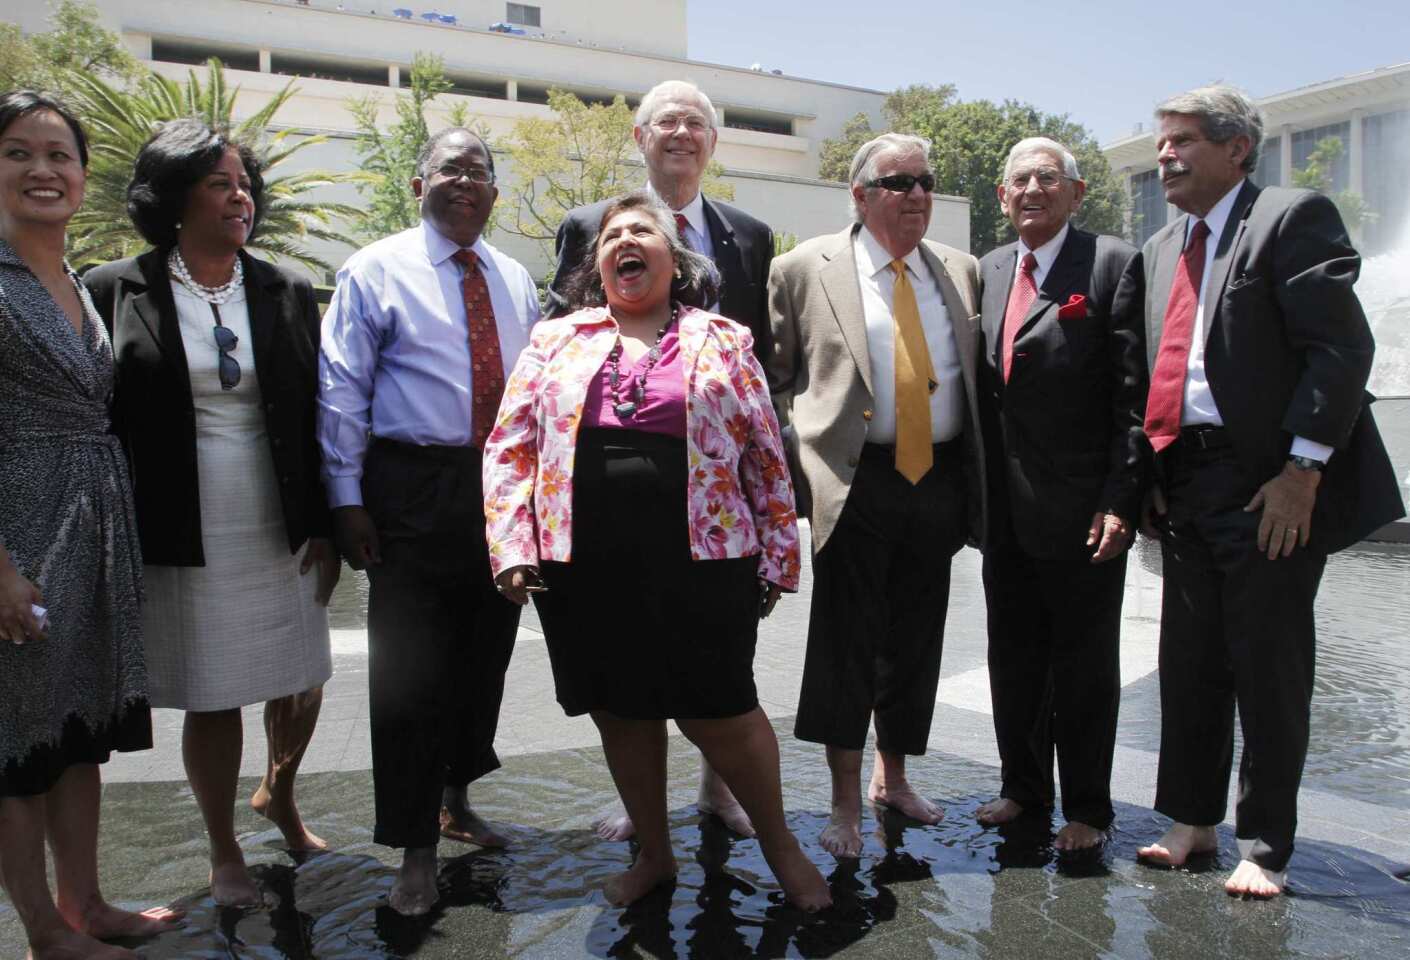 Los Angeles politicians and billionaire philanthropist Eli Broad took off their dress shoes and celebrated together in the renovated Arthur J. Will Memorial Fountain on Thursday to cap off the opening of Grand Park. From left are Bea Hsu, vice president, development, Related California (Related Cos. funded the new park); Councilwoman Jan Perry, Los Angeles County Supervisor Mark Ridley-Thomas, Supervisor Gloria Molina, Supervisor Michael D. Antonovich, Supervisor Don Knabe, Broad and Supervisor Zev Yaroslavsky.